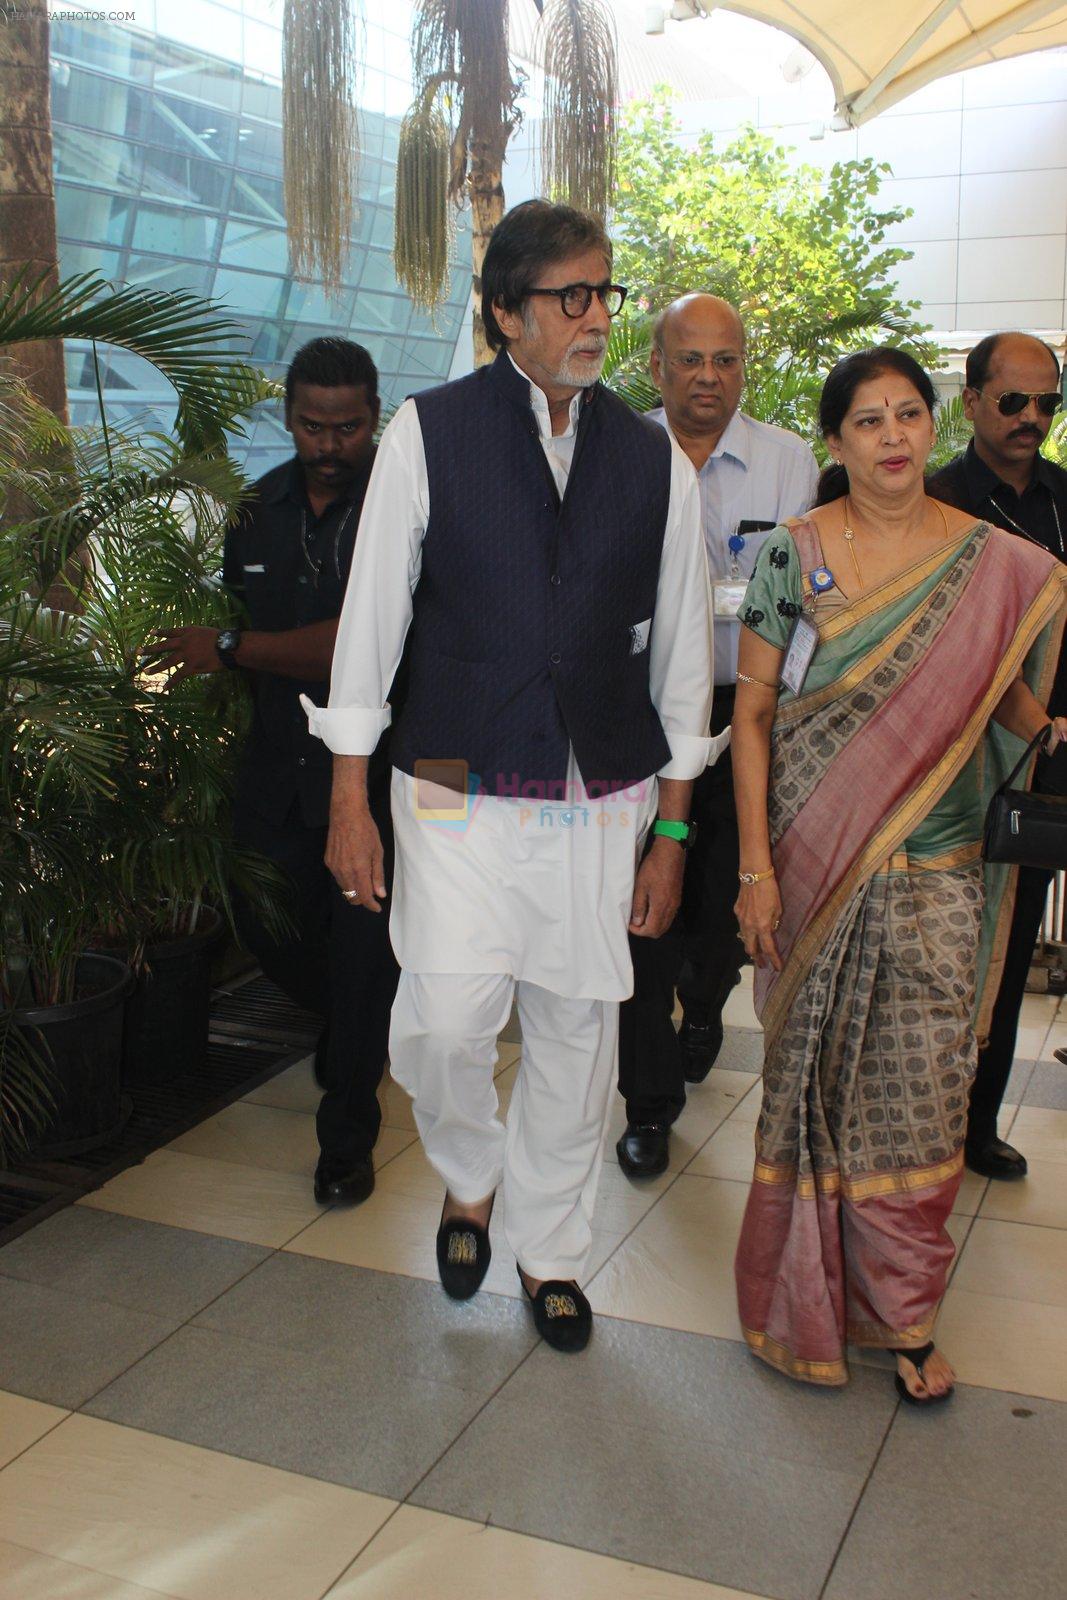 Amitabh Bachchan snapped at airport on 1st Feb 2016